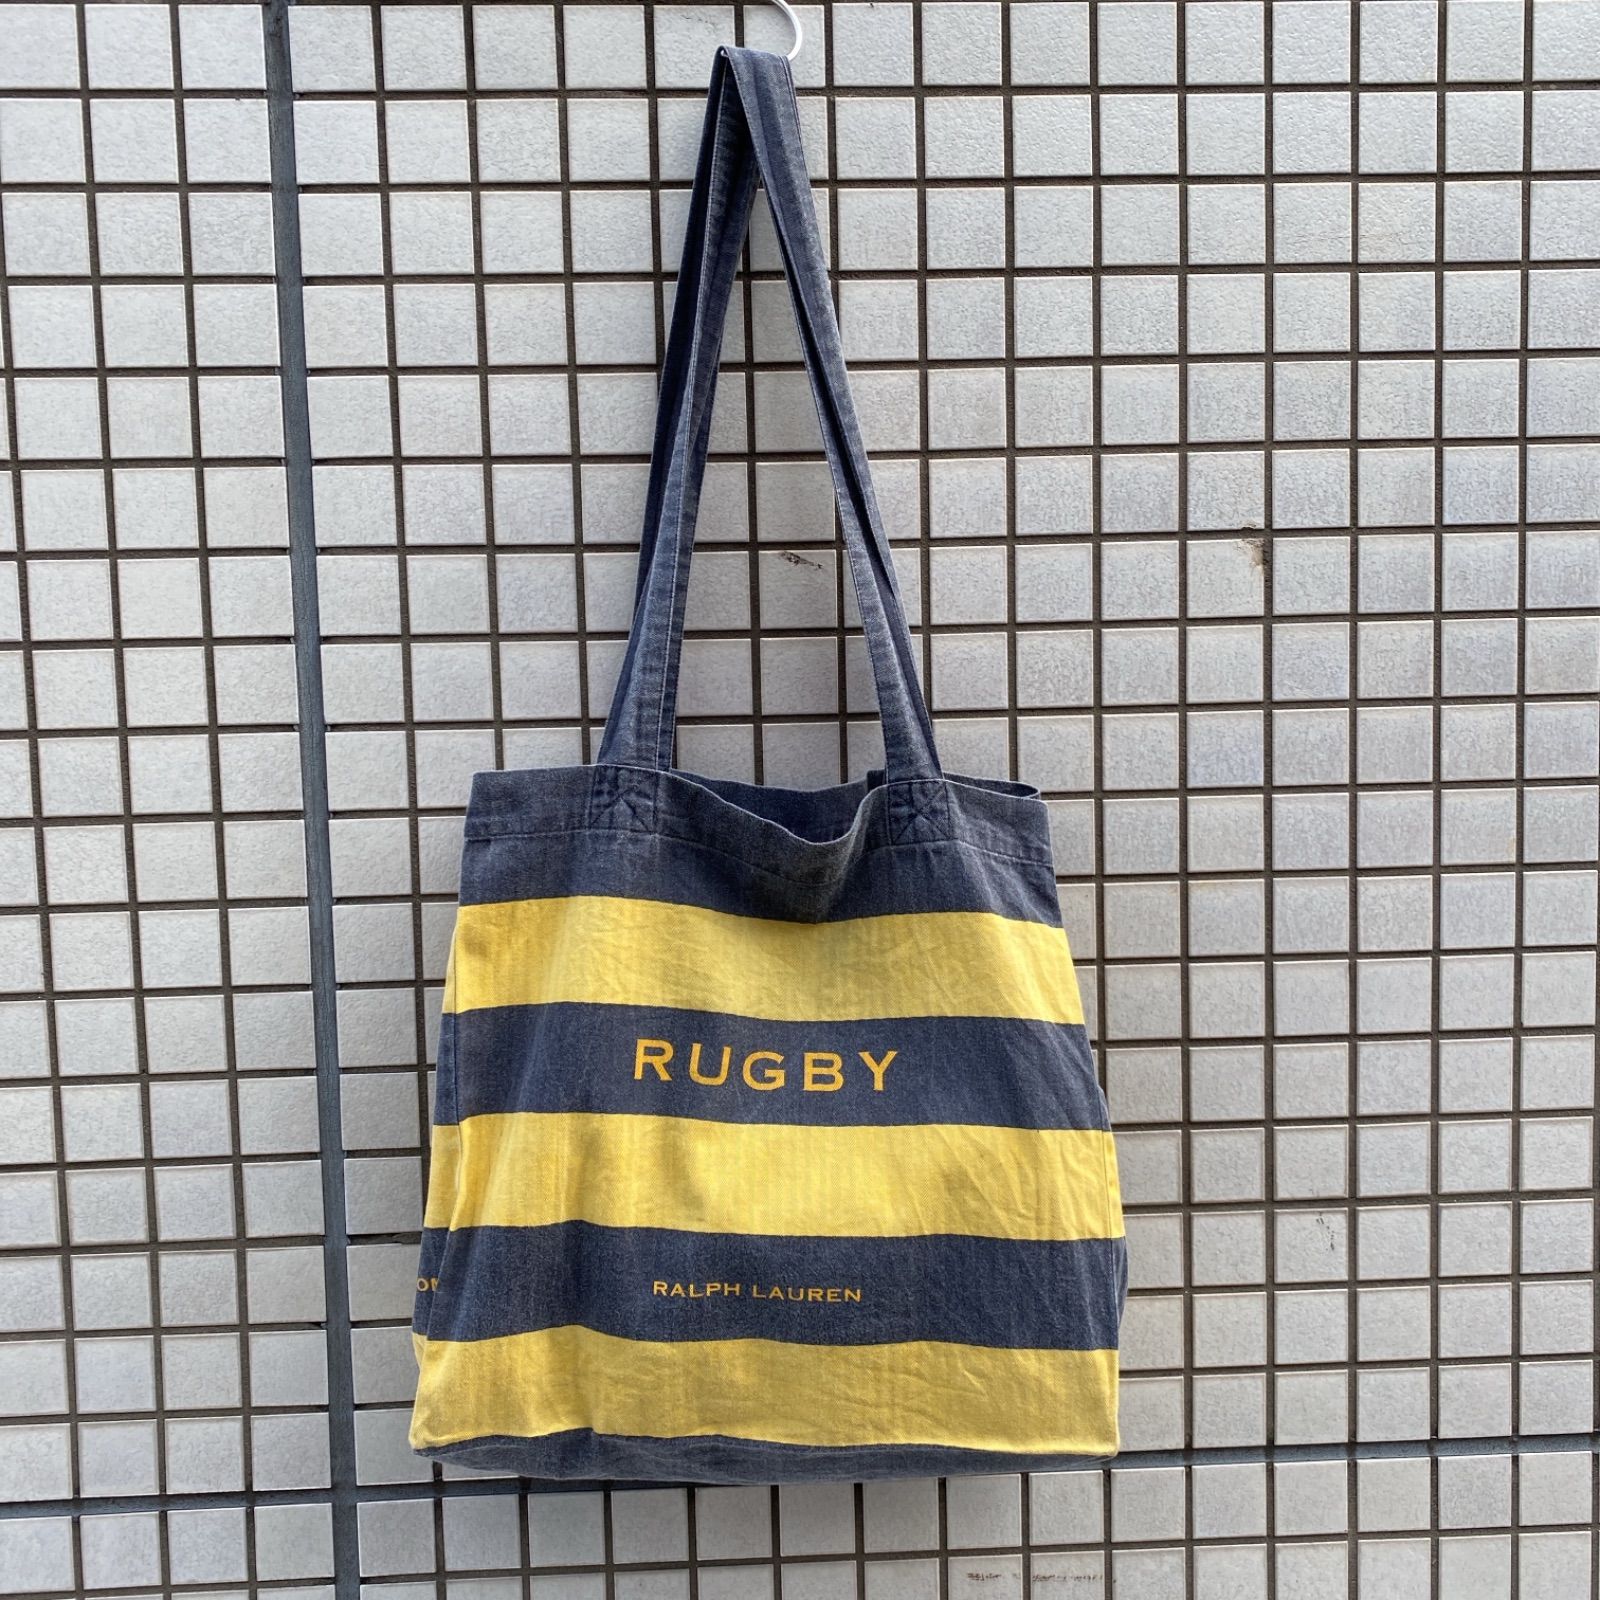 Polobyポロ ラルフローレン RUGBY  トートバッグ